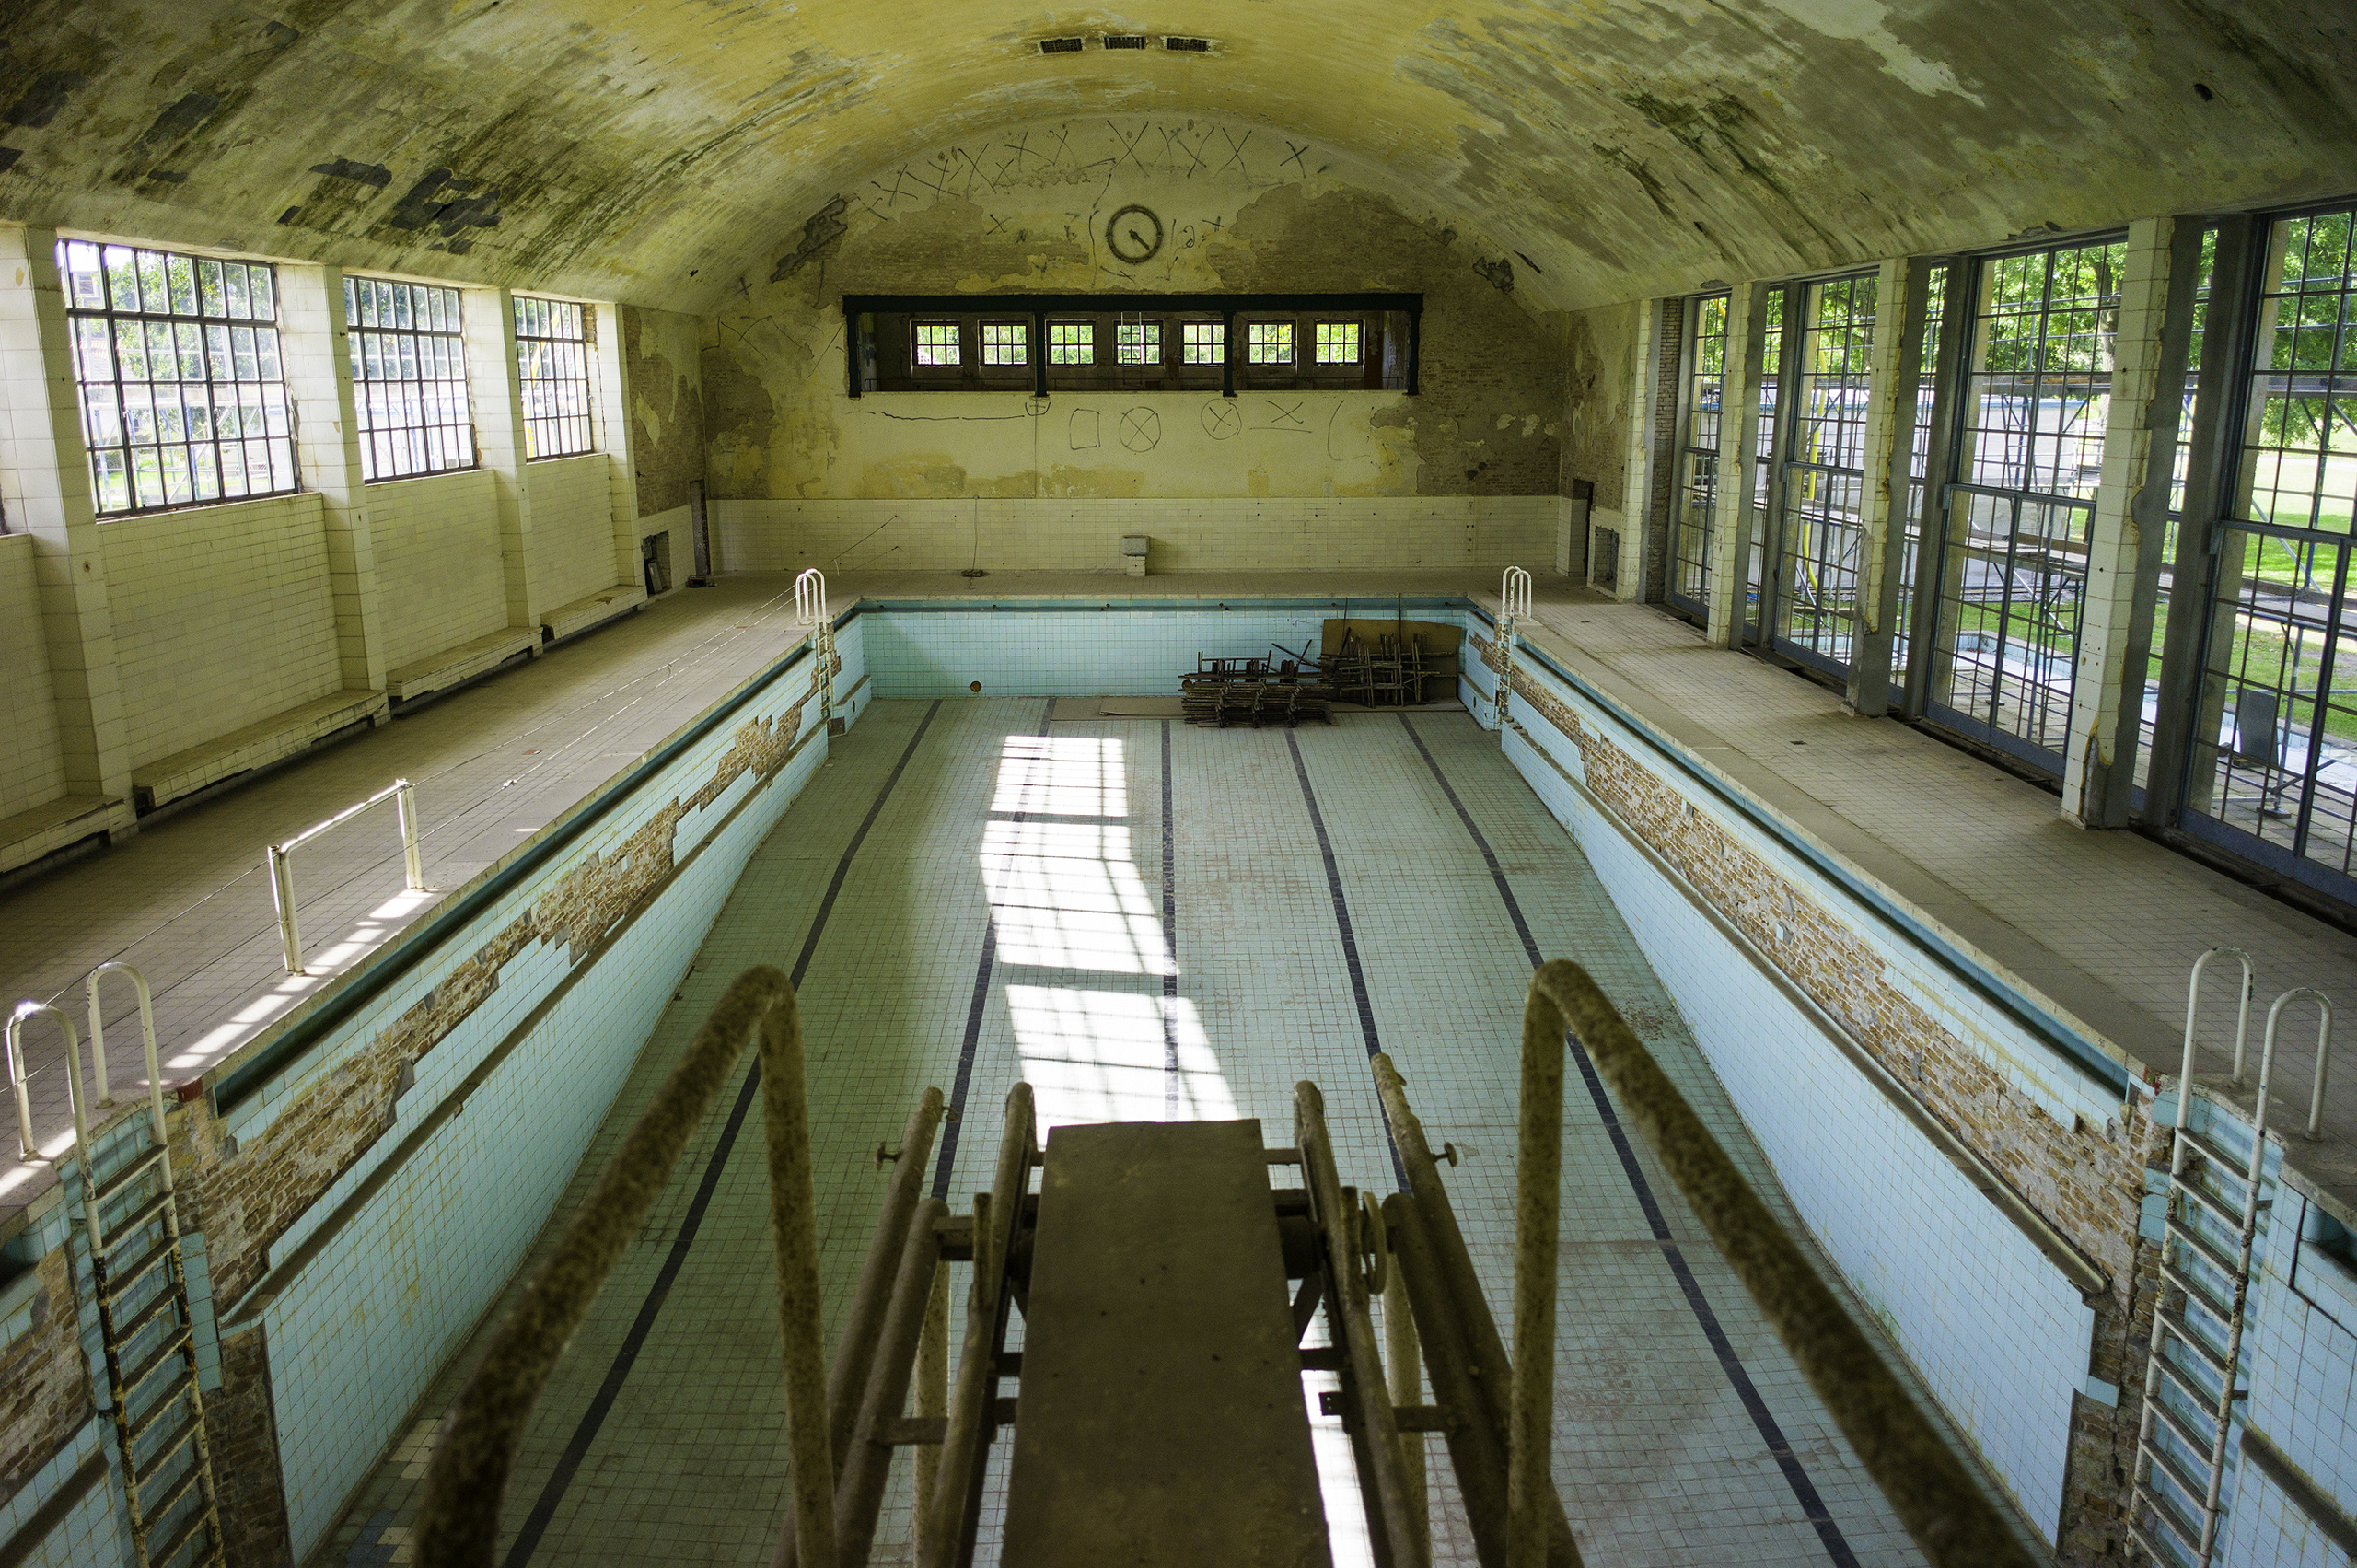 The empty swimming pool at the Olympic Village located west of Berlin, host of the 1936 Olympics, in the town of Elstal. After WWII it was occupied by the Soviet army and used by them until their withdrawal in 1992. The dining hall, the swimming pool, and the gymnasium still stand, along with the ruins of dozens of abandoned housing buildings. After decades of neglect, there is an effort underway to restore the premises as a historic site.